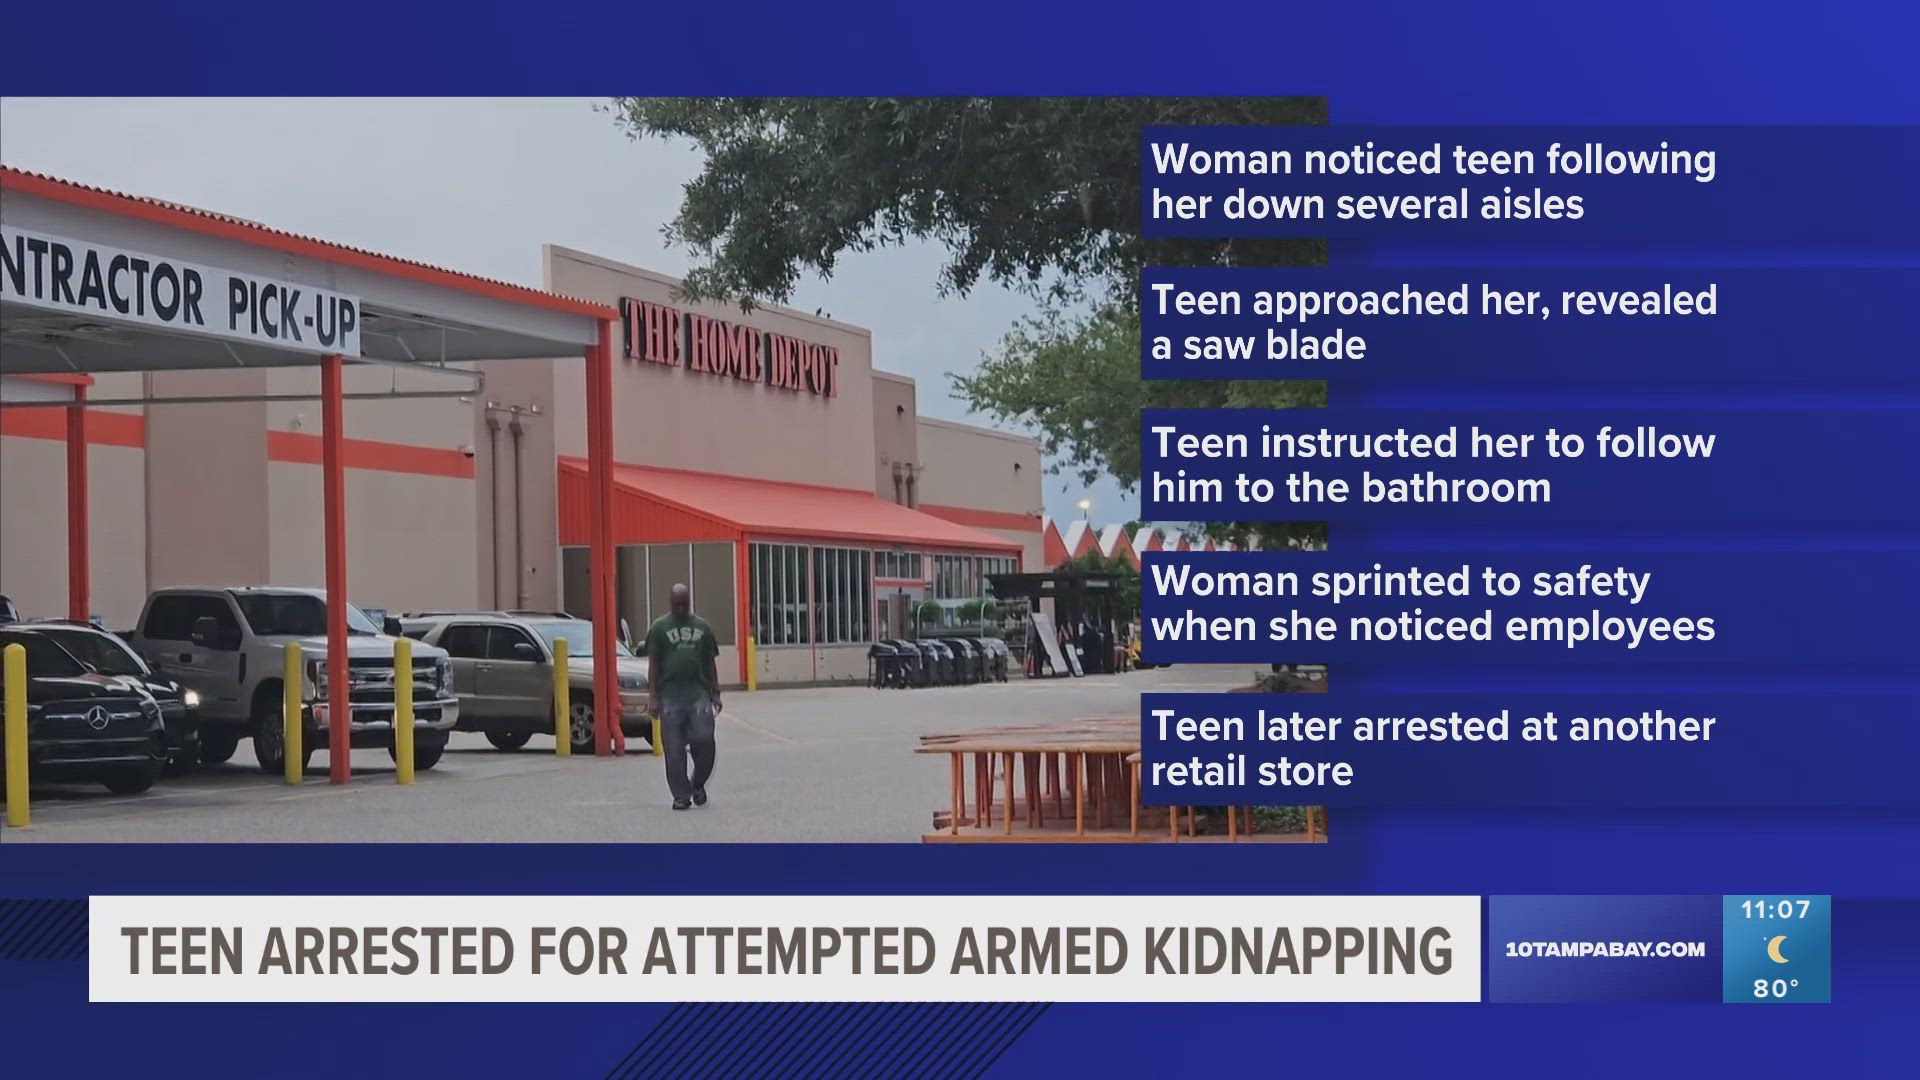 The teen is facing multiple charges, including attempted armed kidnapping.